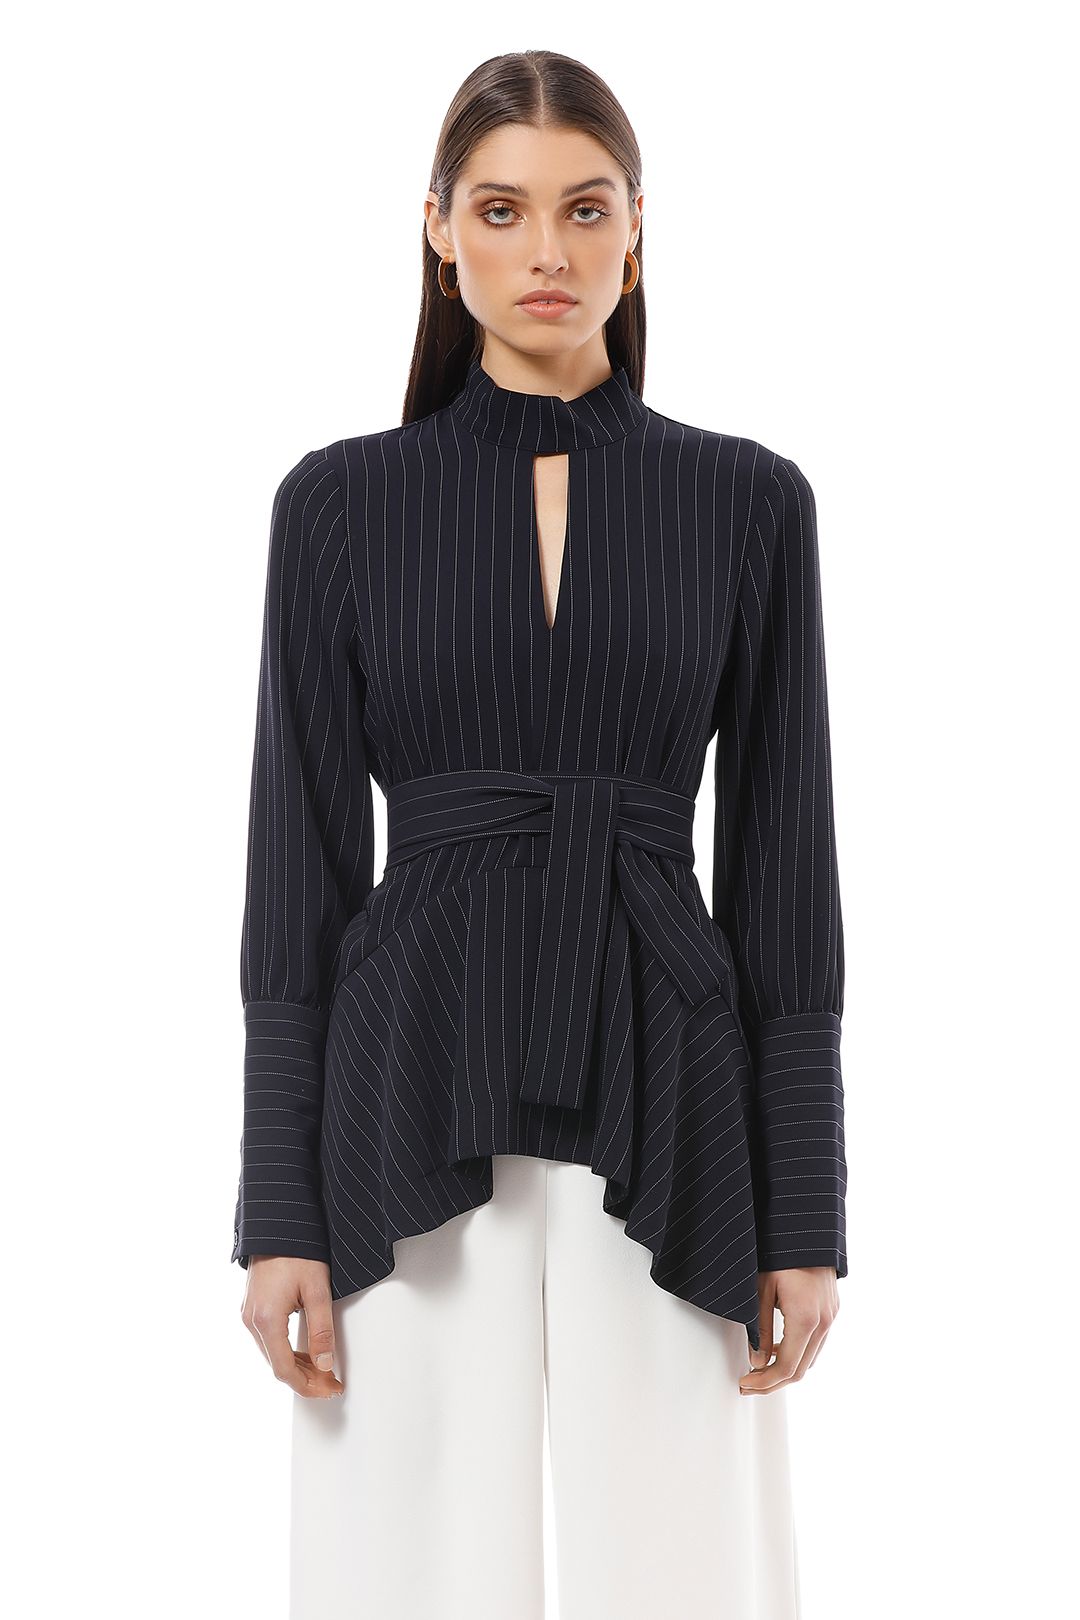 Talon Pinstripe Blouse by Camilla and Marc for Hire